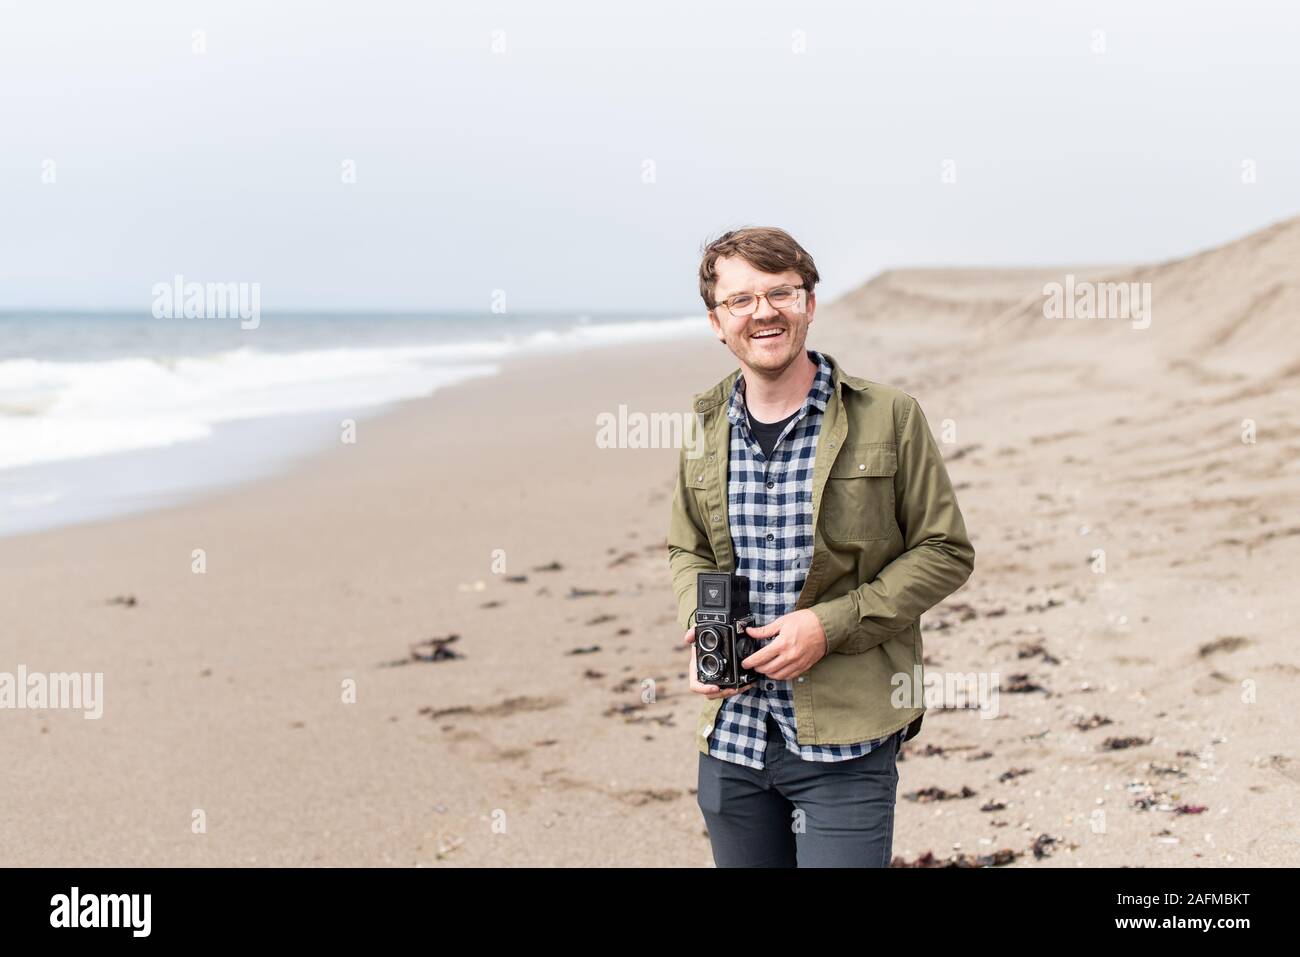 Portrait of young man laughing while holding film camera on beach Stock Photo